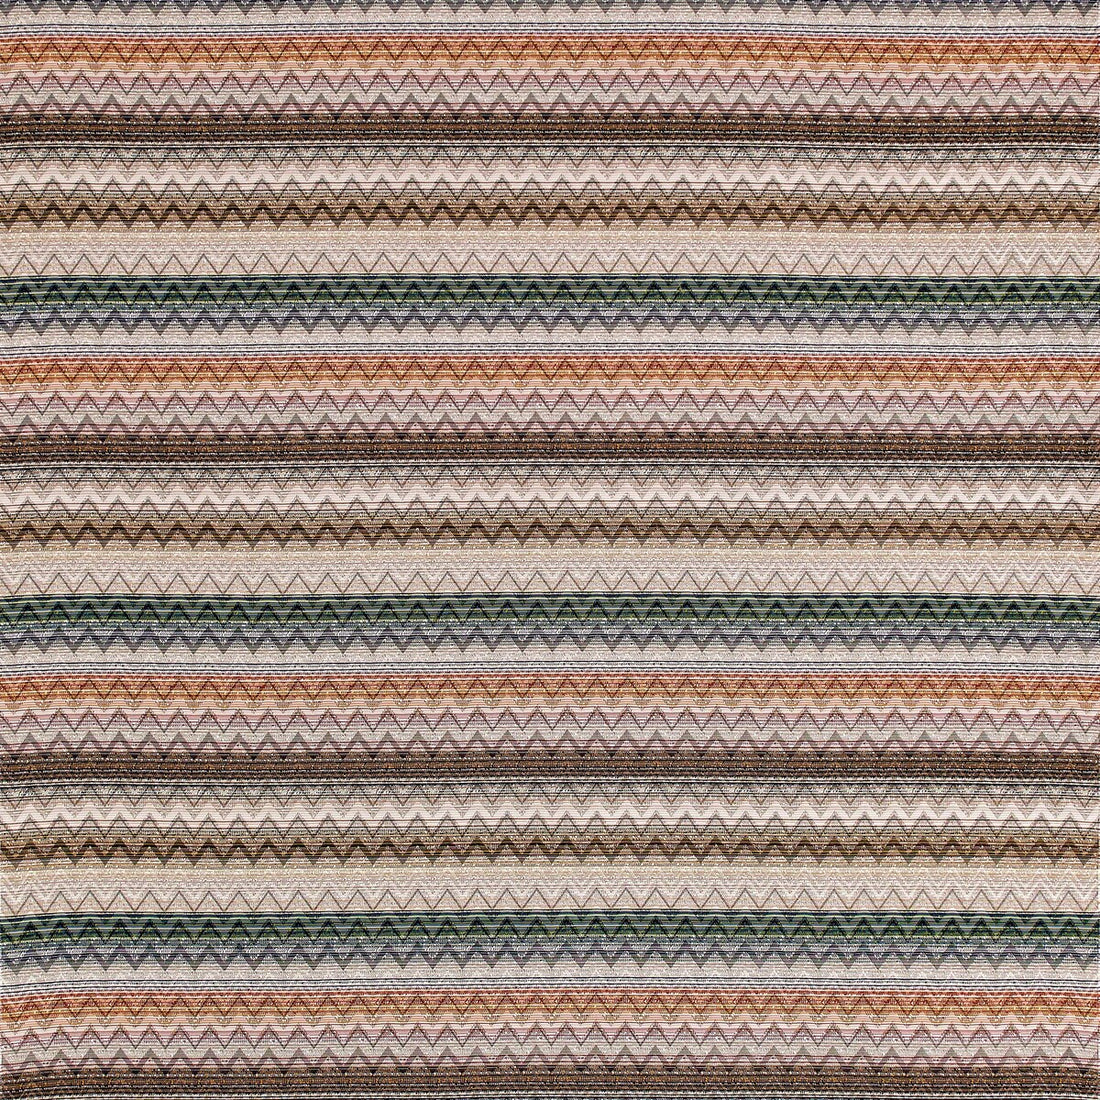 Yate fabric in 164 color - pattern 36239.624.0 - by Kravet Couture in the Missoni Home 2020 collection